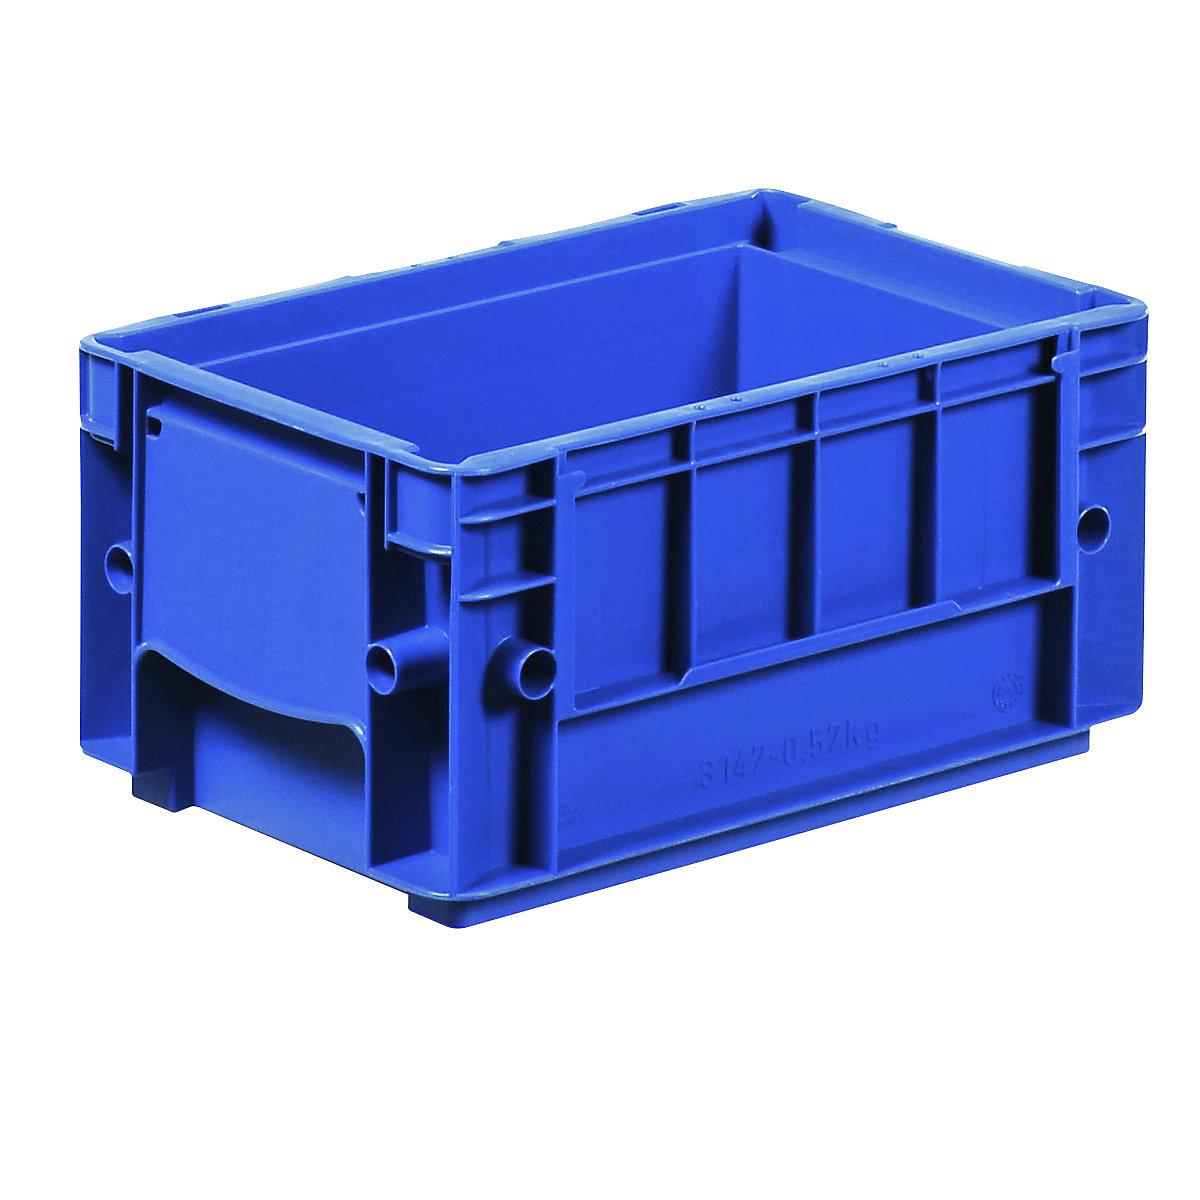 R-KLT container made of PP